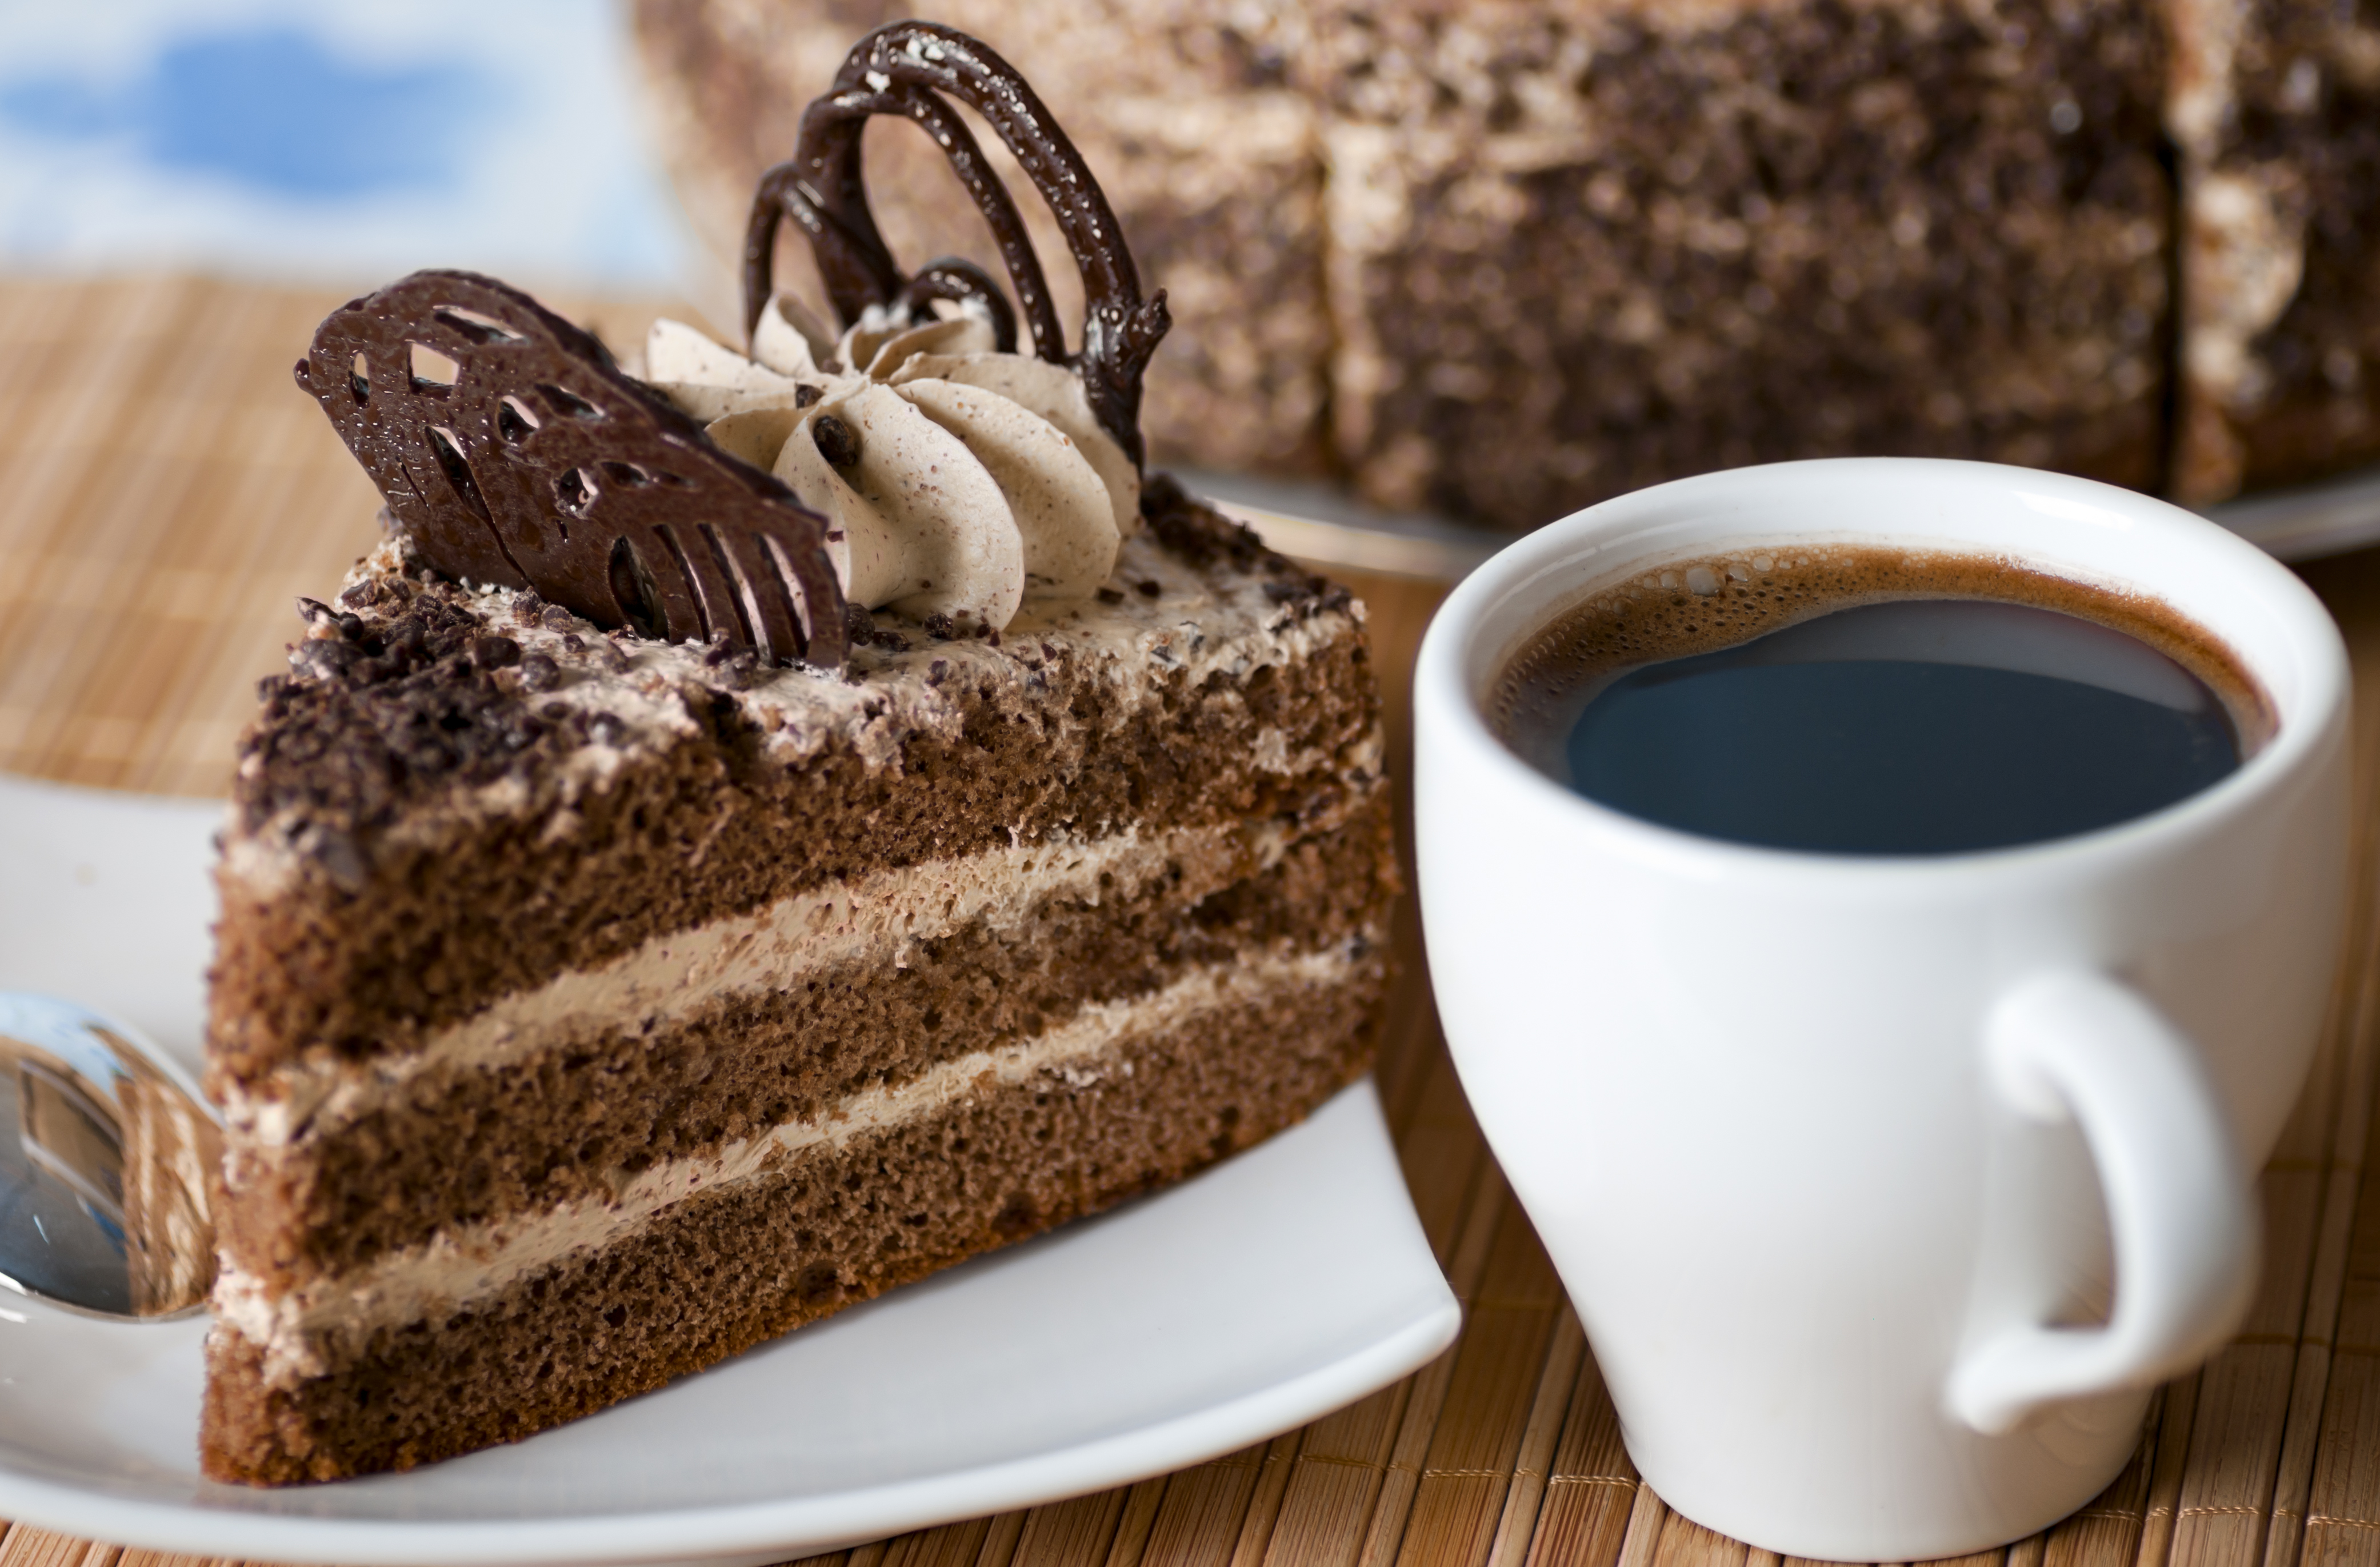 A cup of coffee next to a slice of chocolate cake | Source: Shutterstock